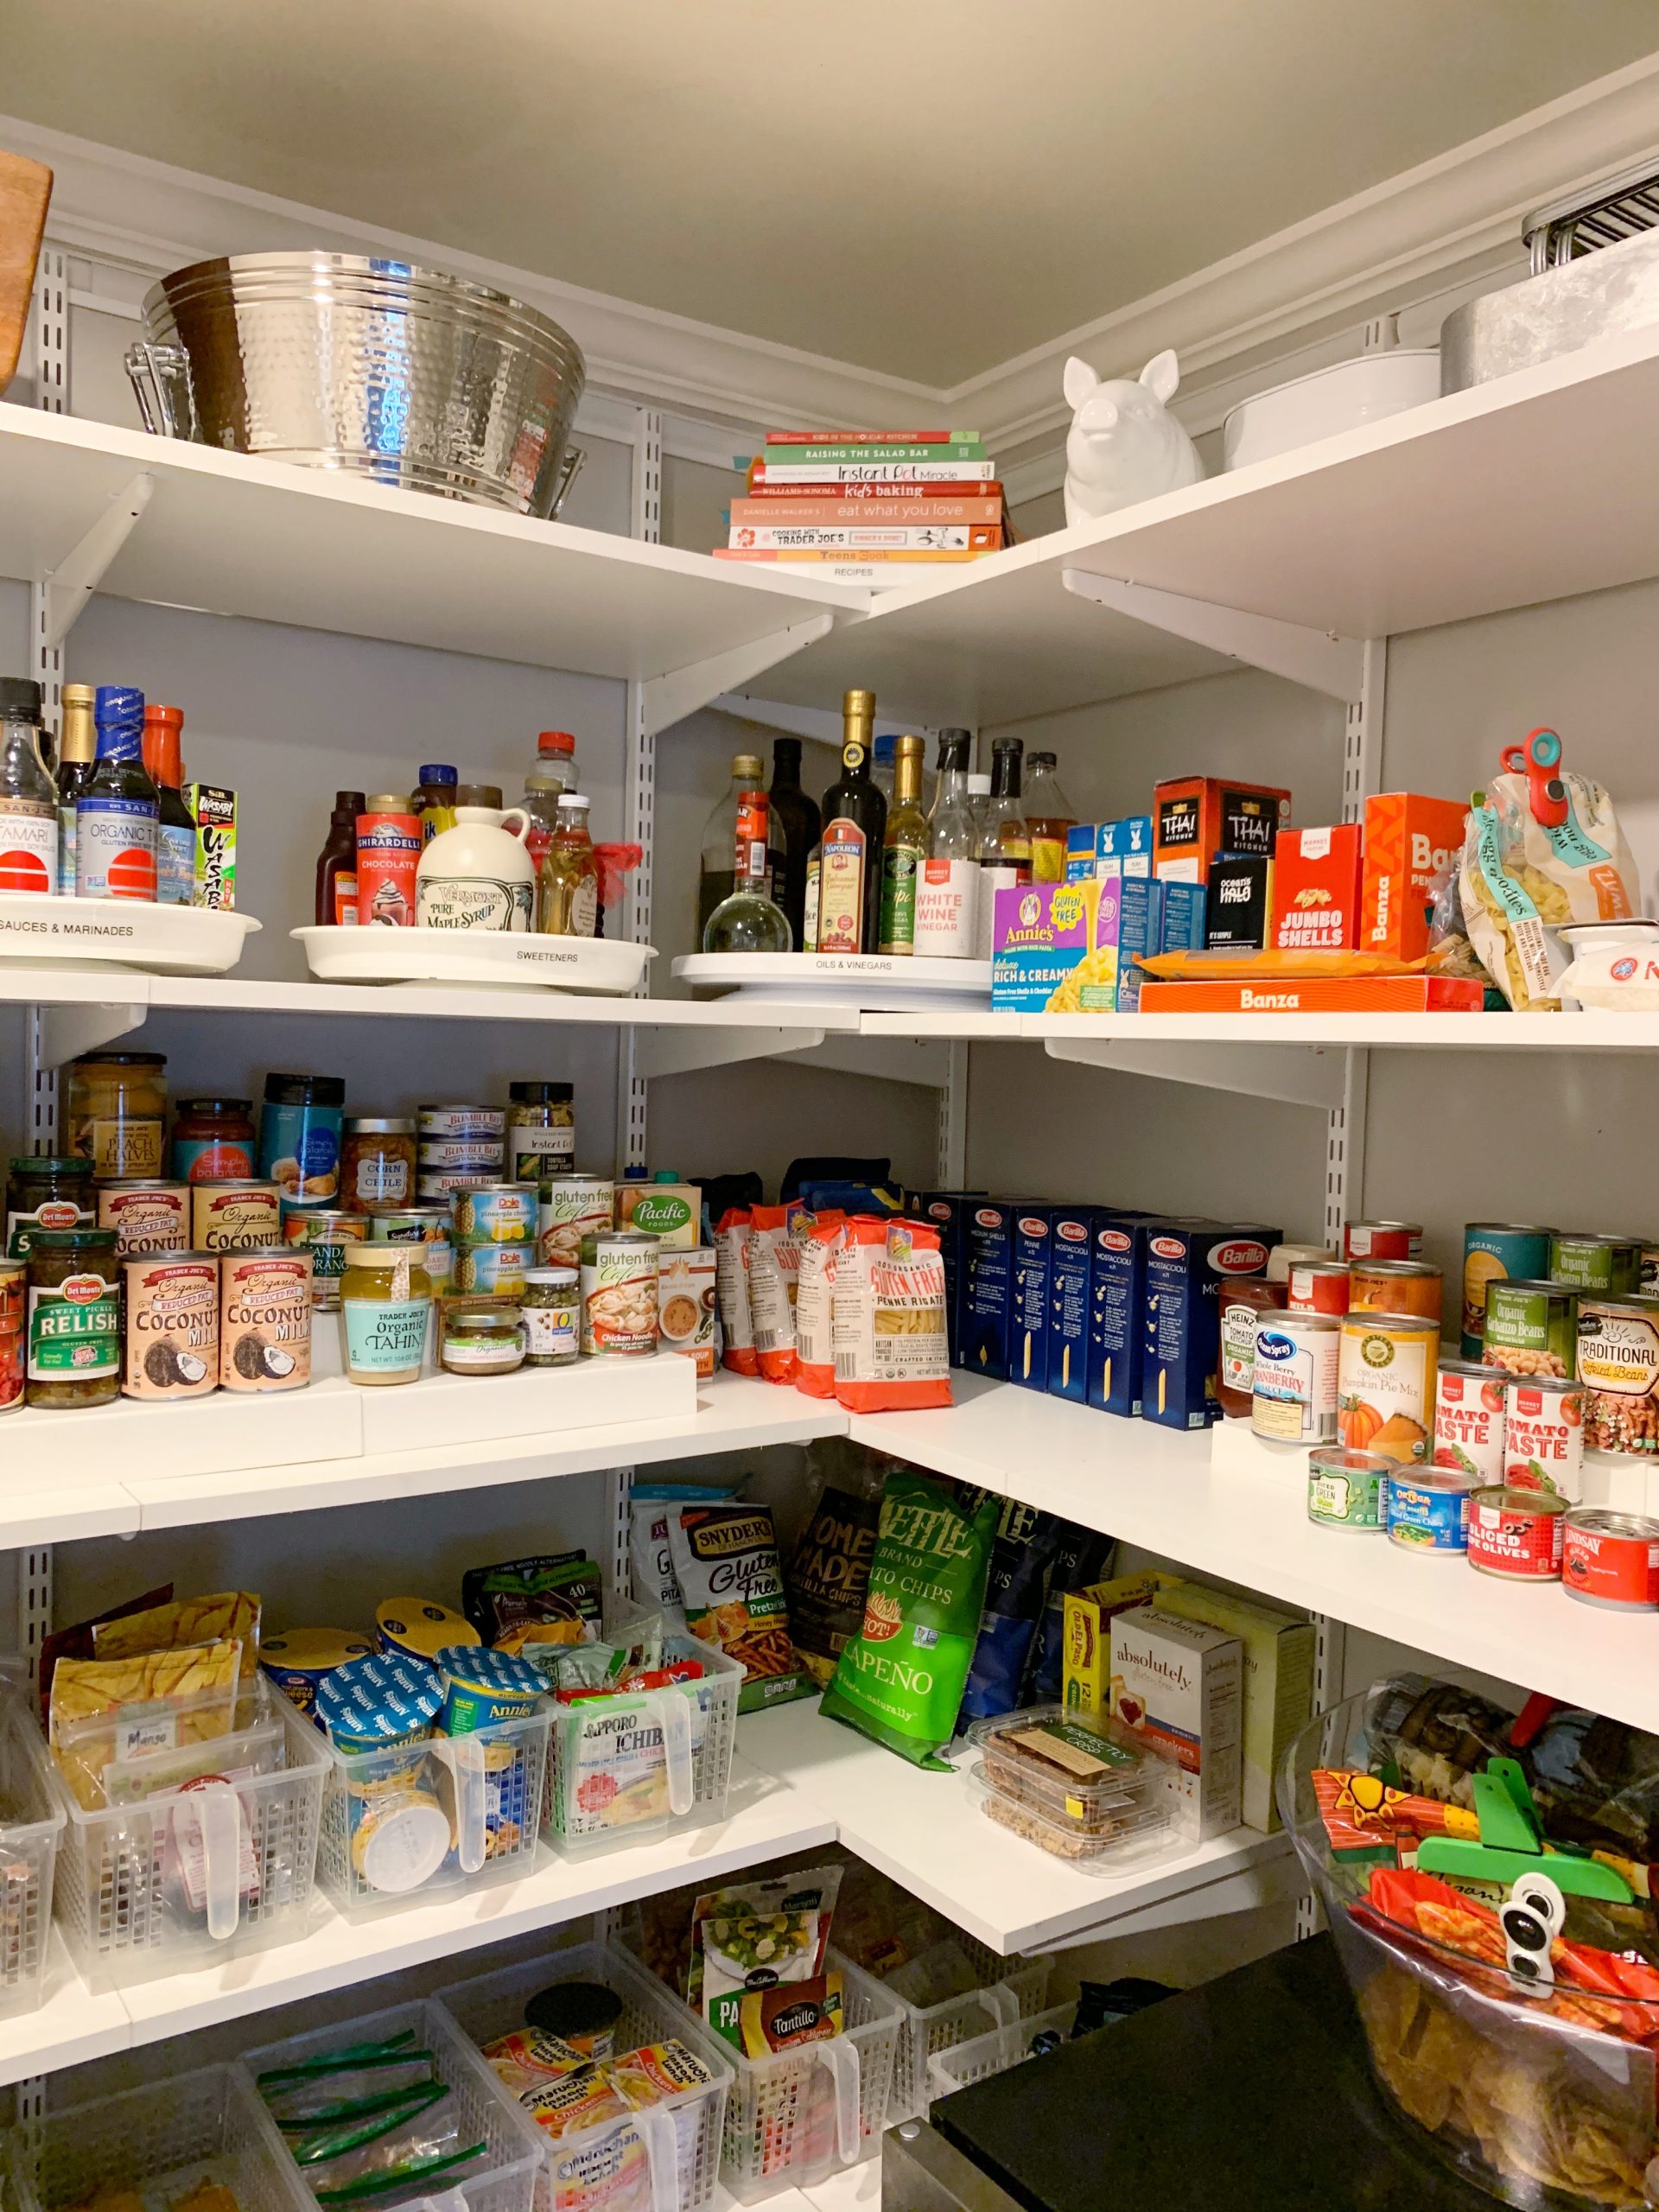 https://simplyorganized.me/wp-content/uploads/2020/01/corner-of-pantry-with-white-shelving-scaled.jpg